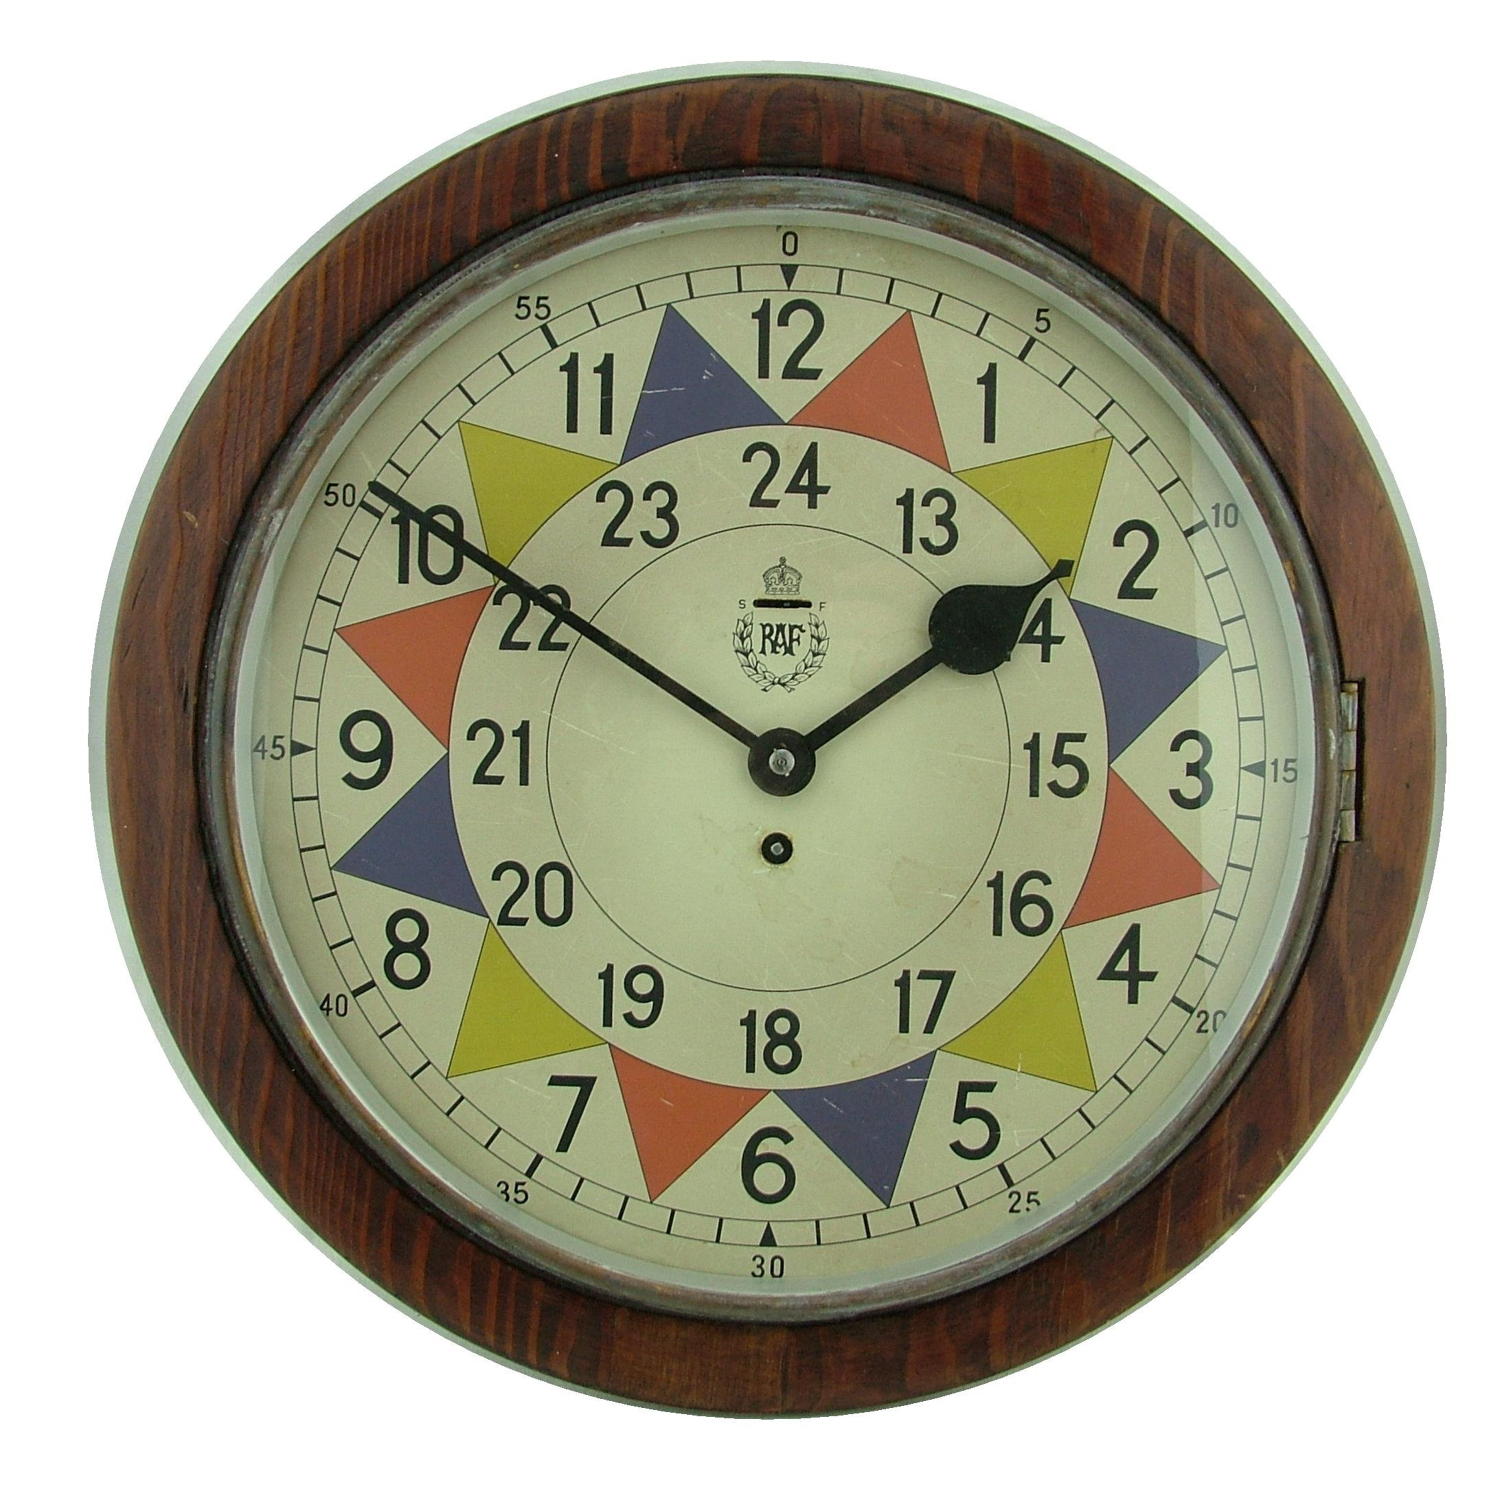 RAF station Sector clock, type 2